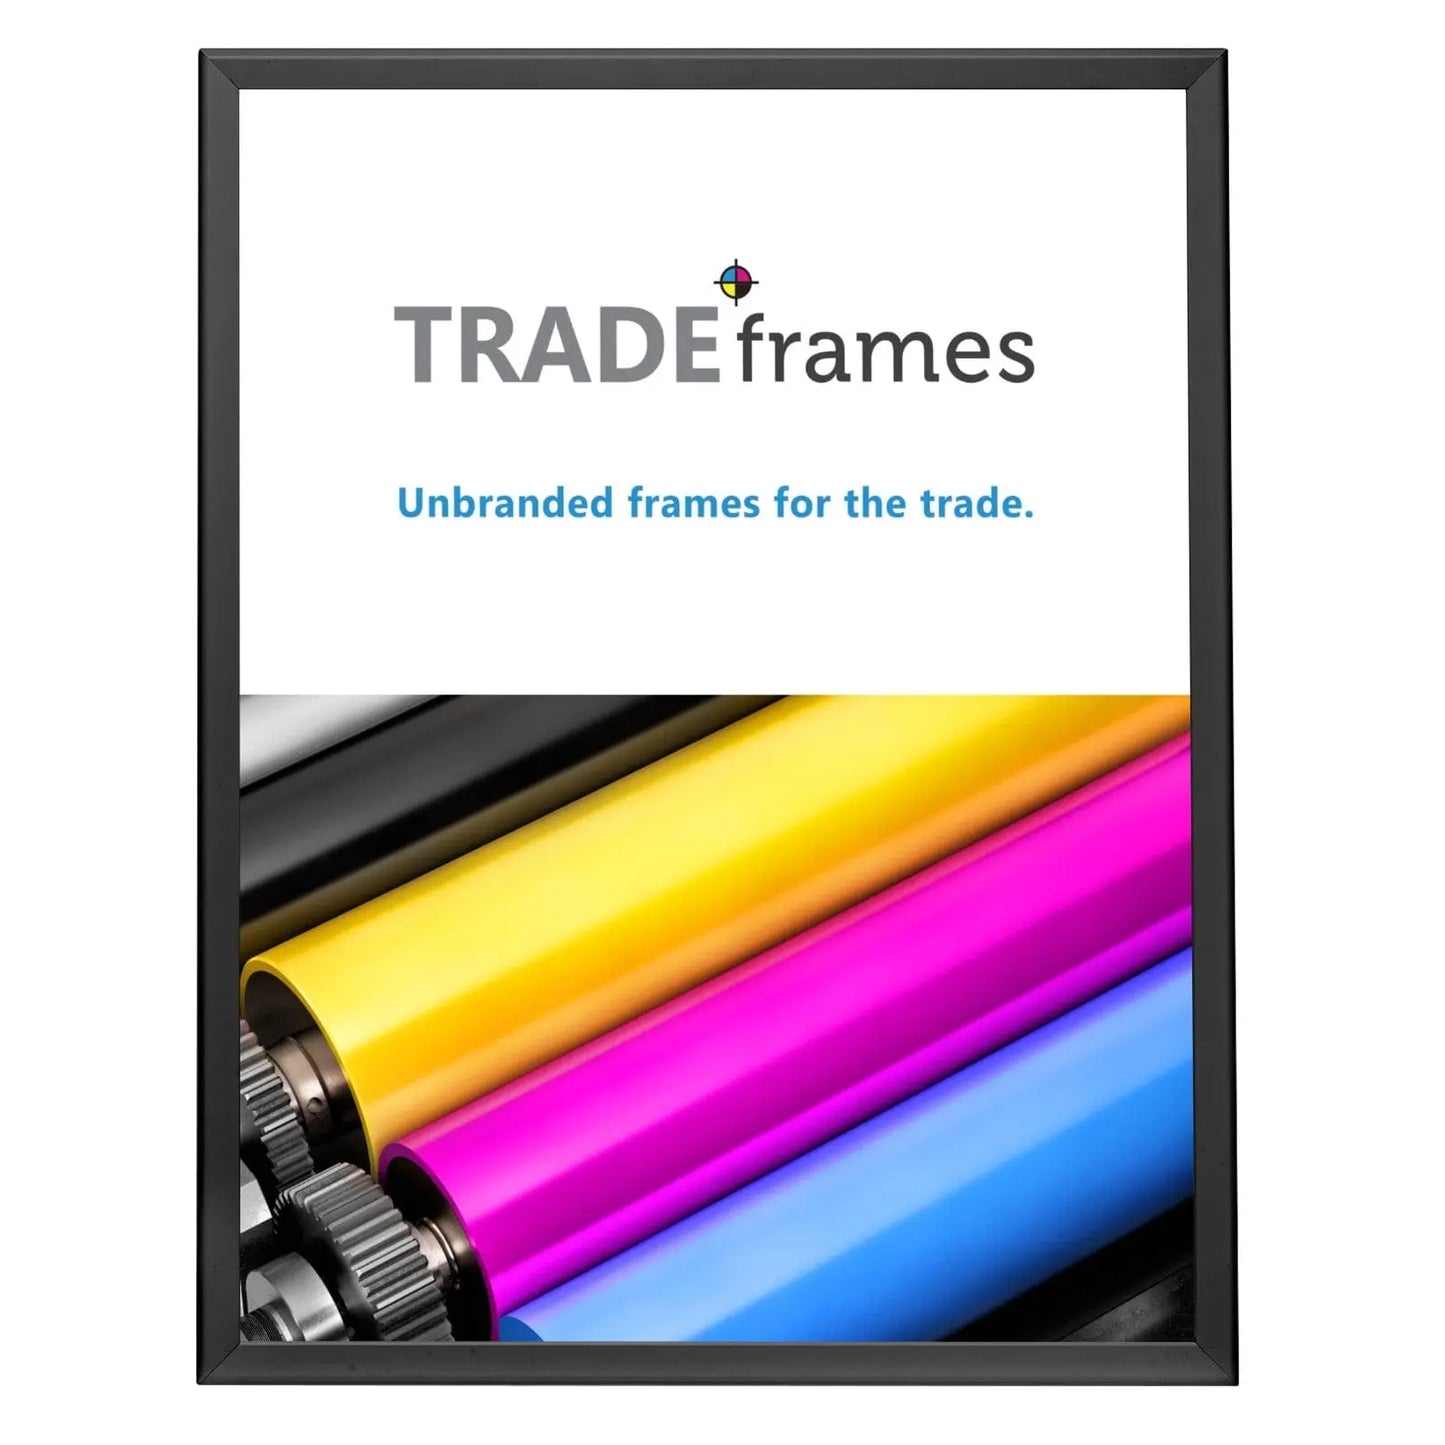 24x30 Inches Black Snap Frame - 1.25 Profile – Snap Frames Direct